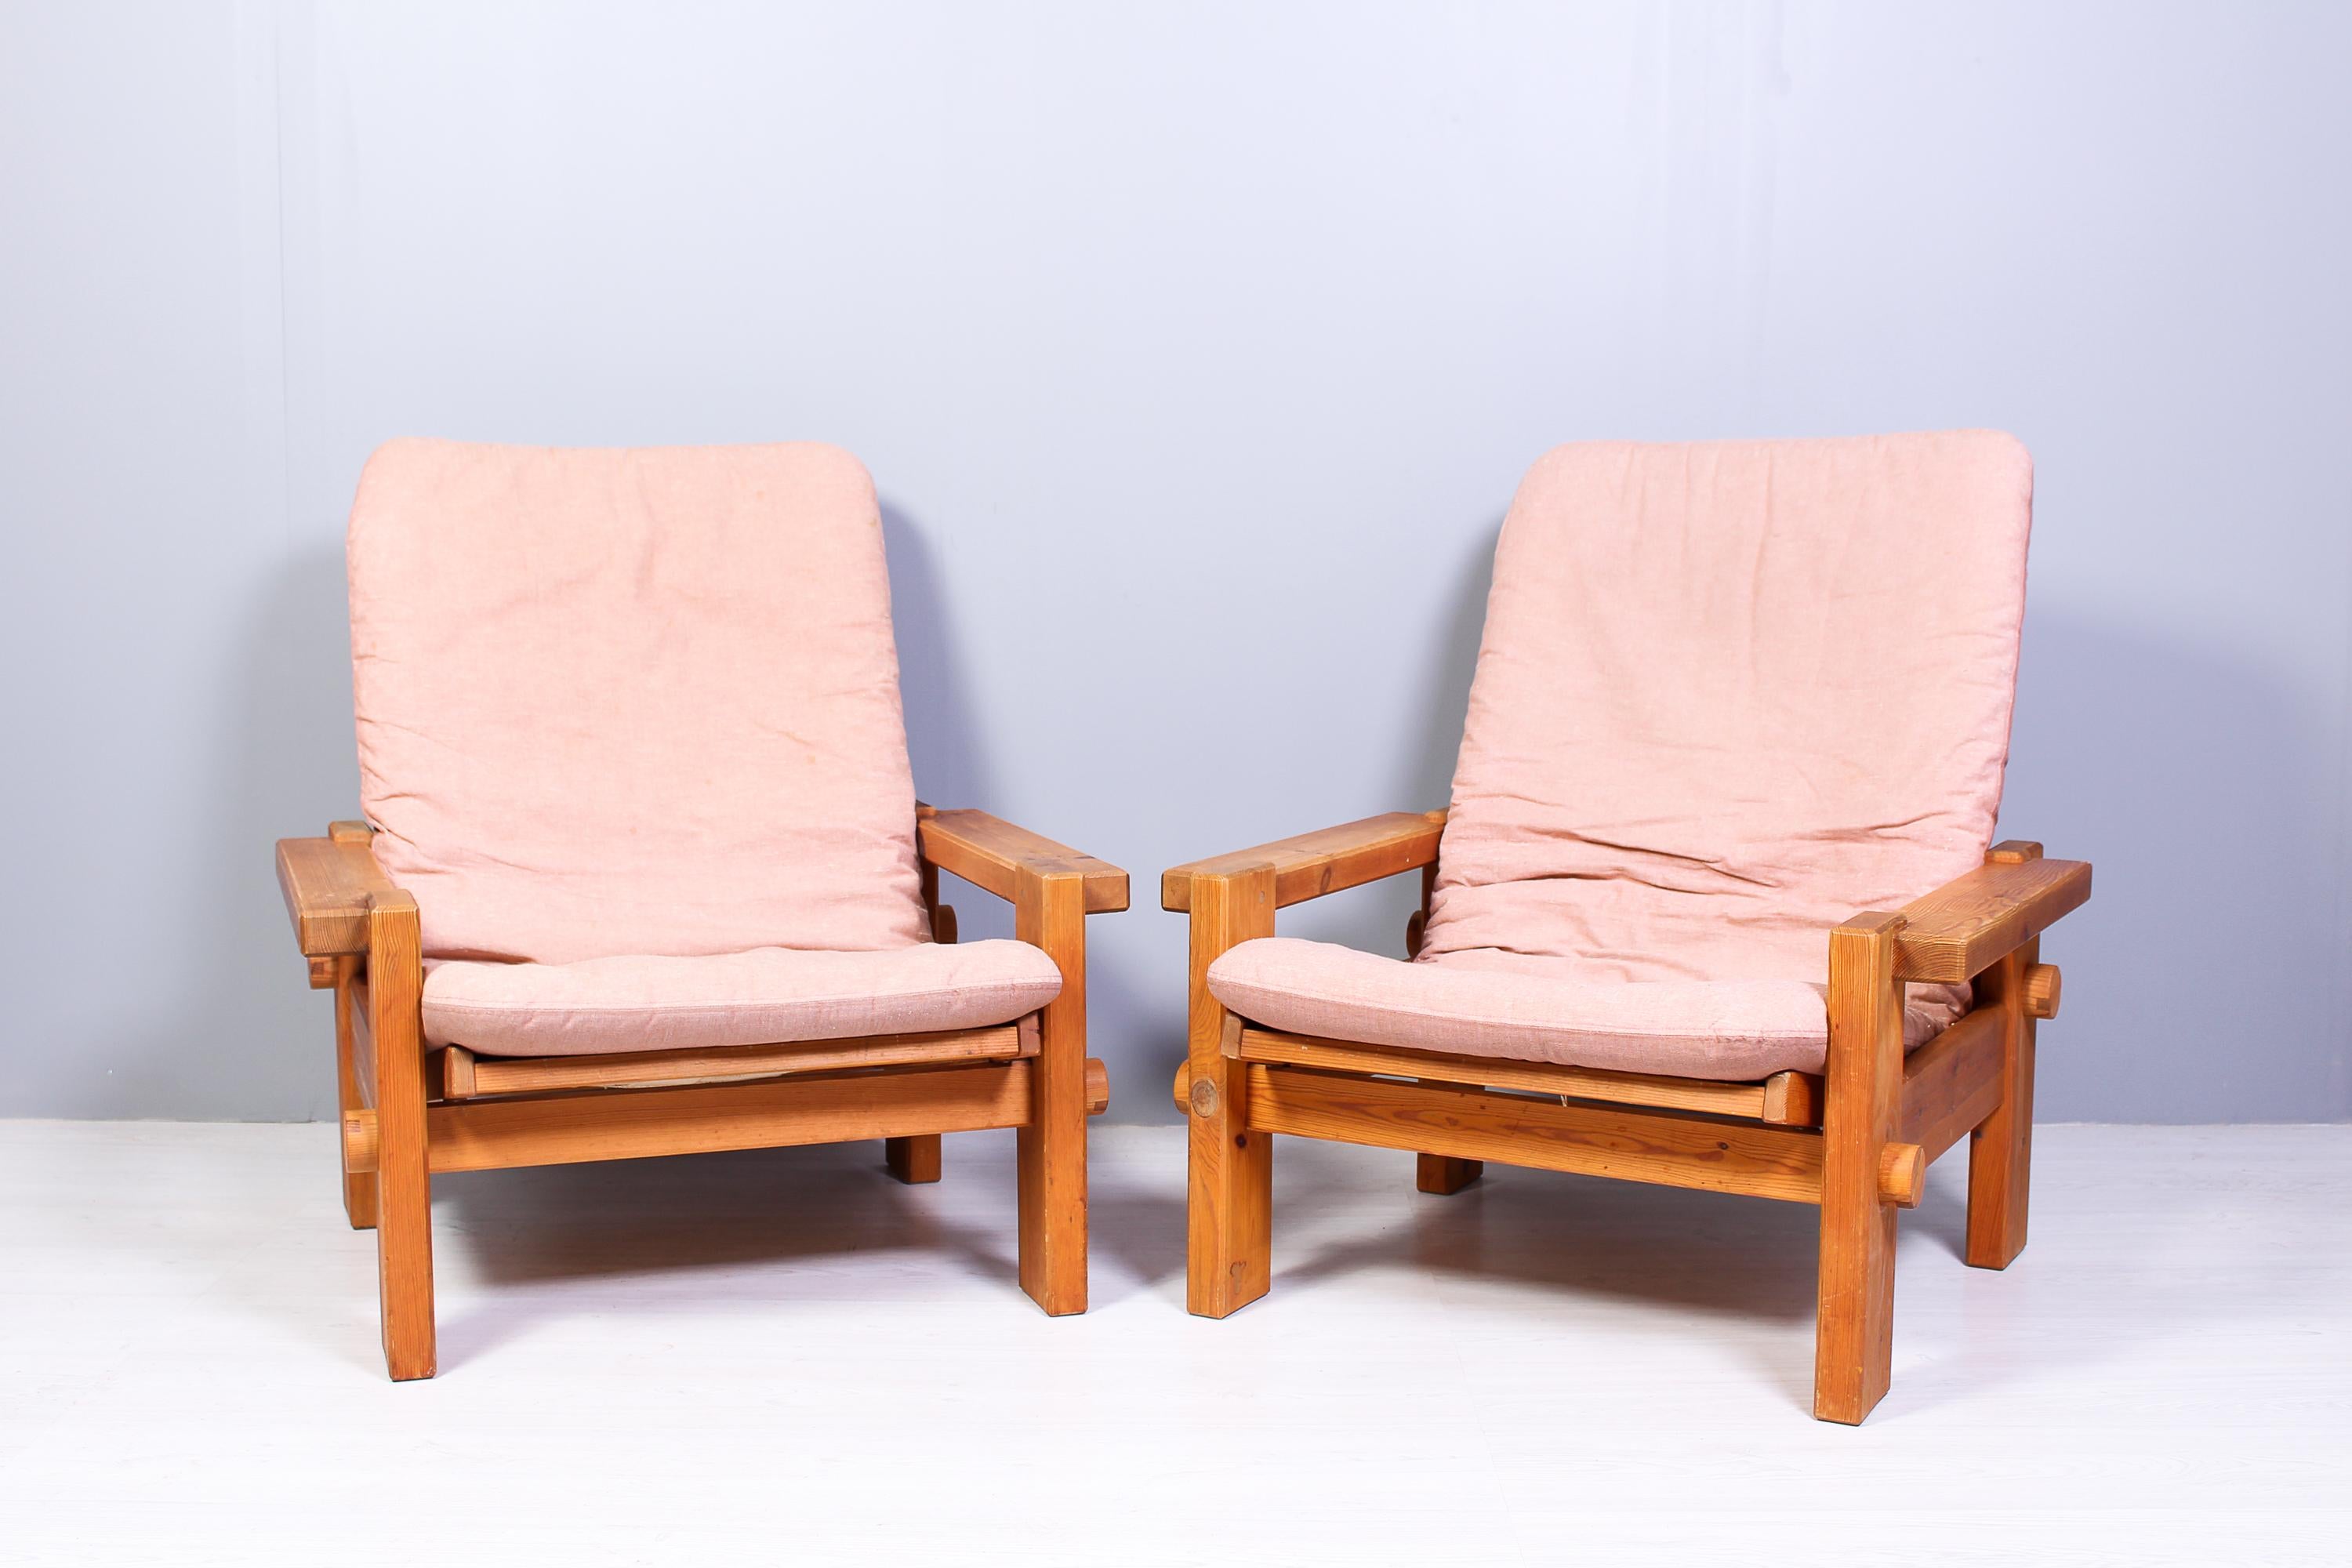 A pair of solid pine lounge chairs by Yngve Ekström, produced by Swedese in the 1970s. The brutal design and solid pine is the signature of this nice design by the well-known Swedish designer. The chairs has signs of usage and patina consistent with